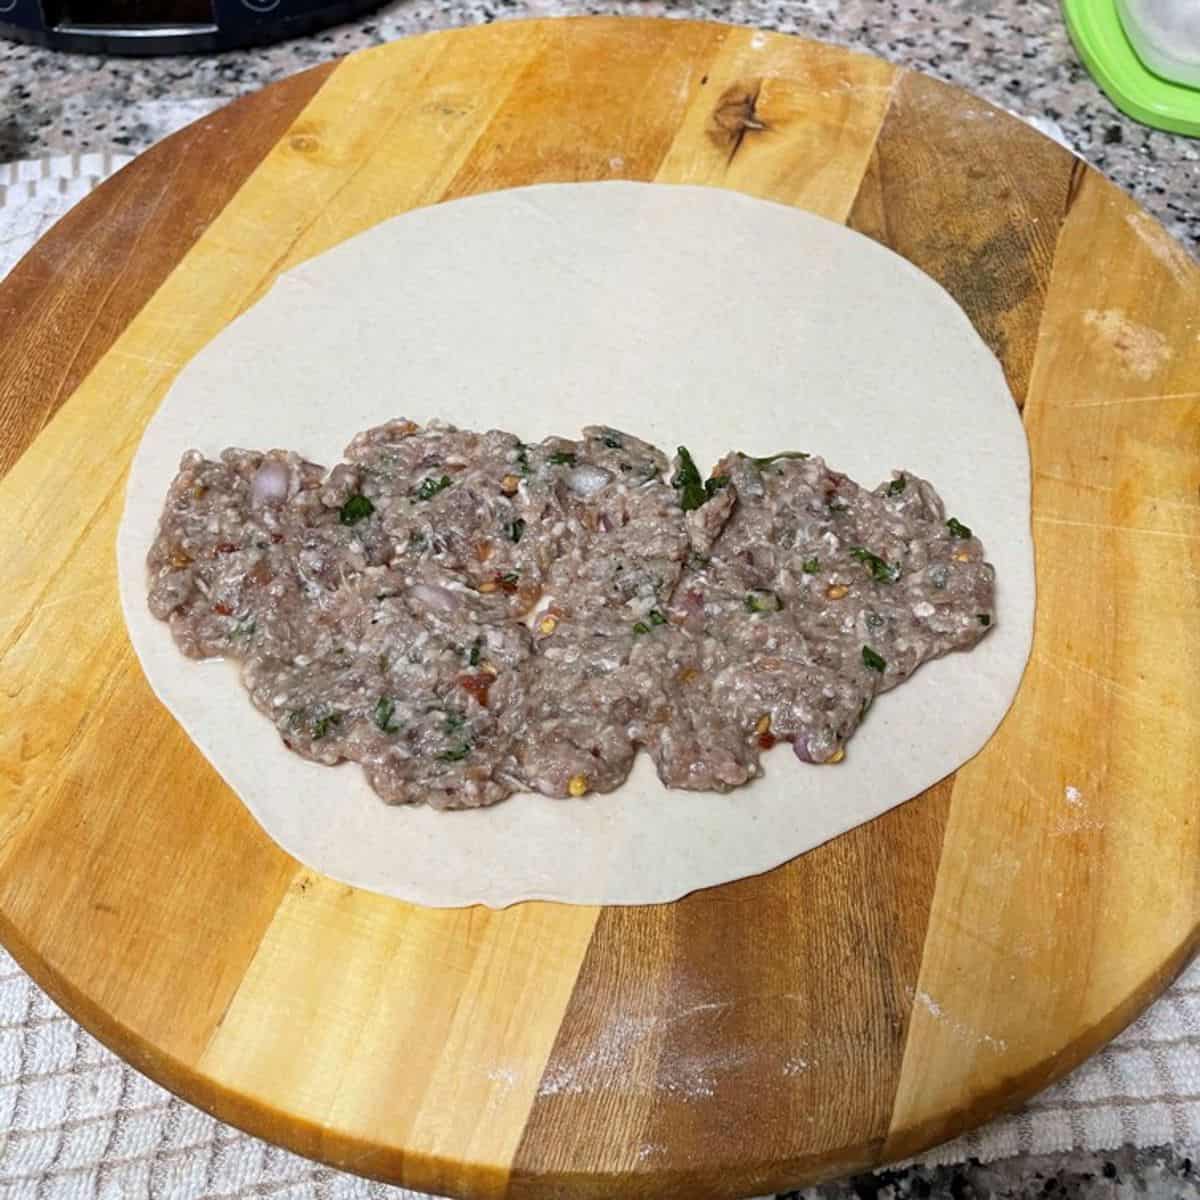 Thinly rolled dough with meat stuffing on one side.